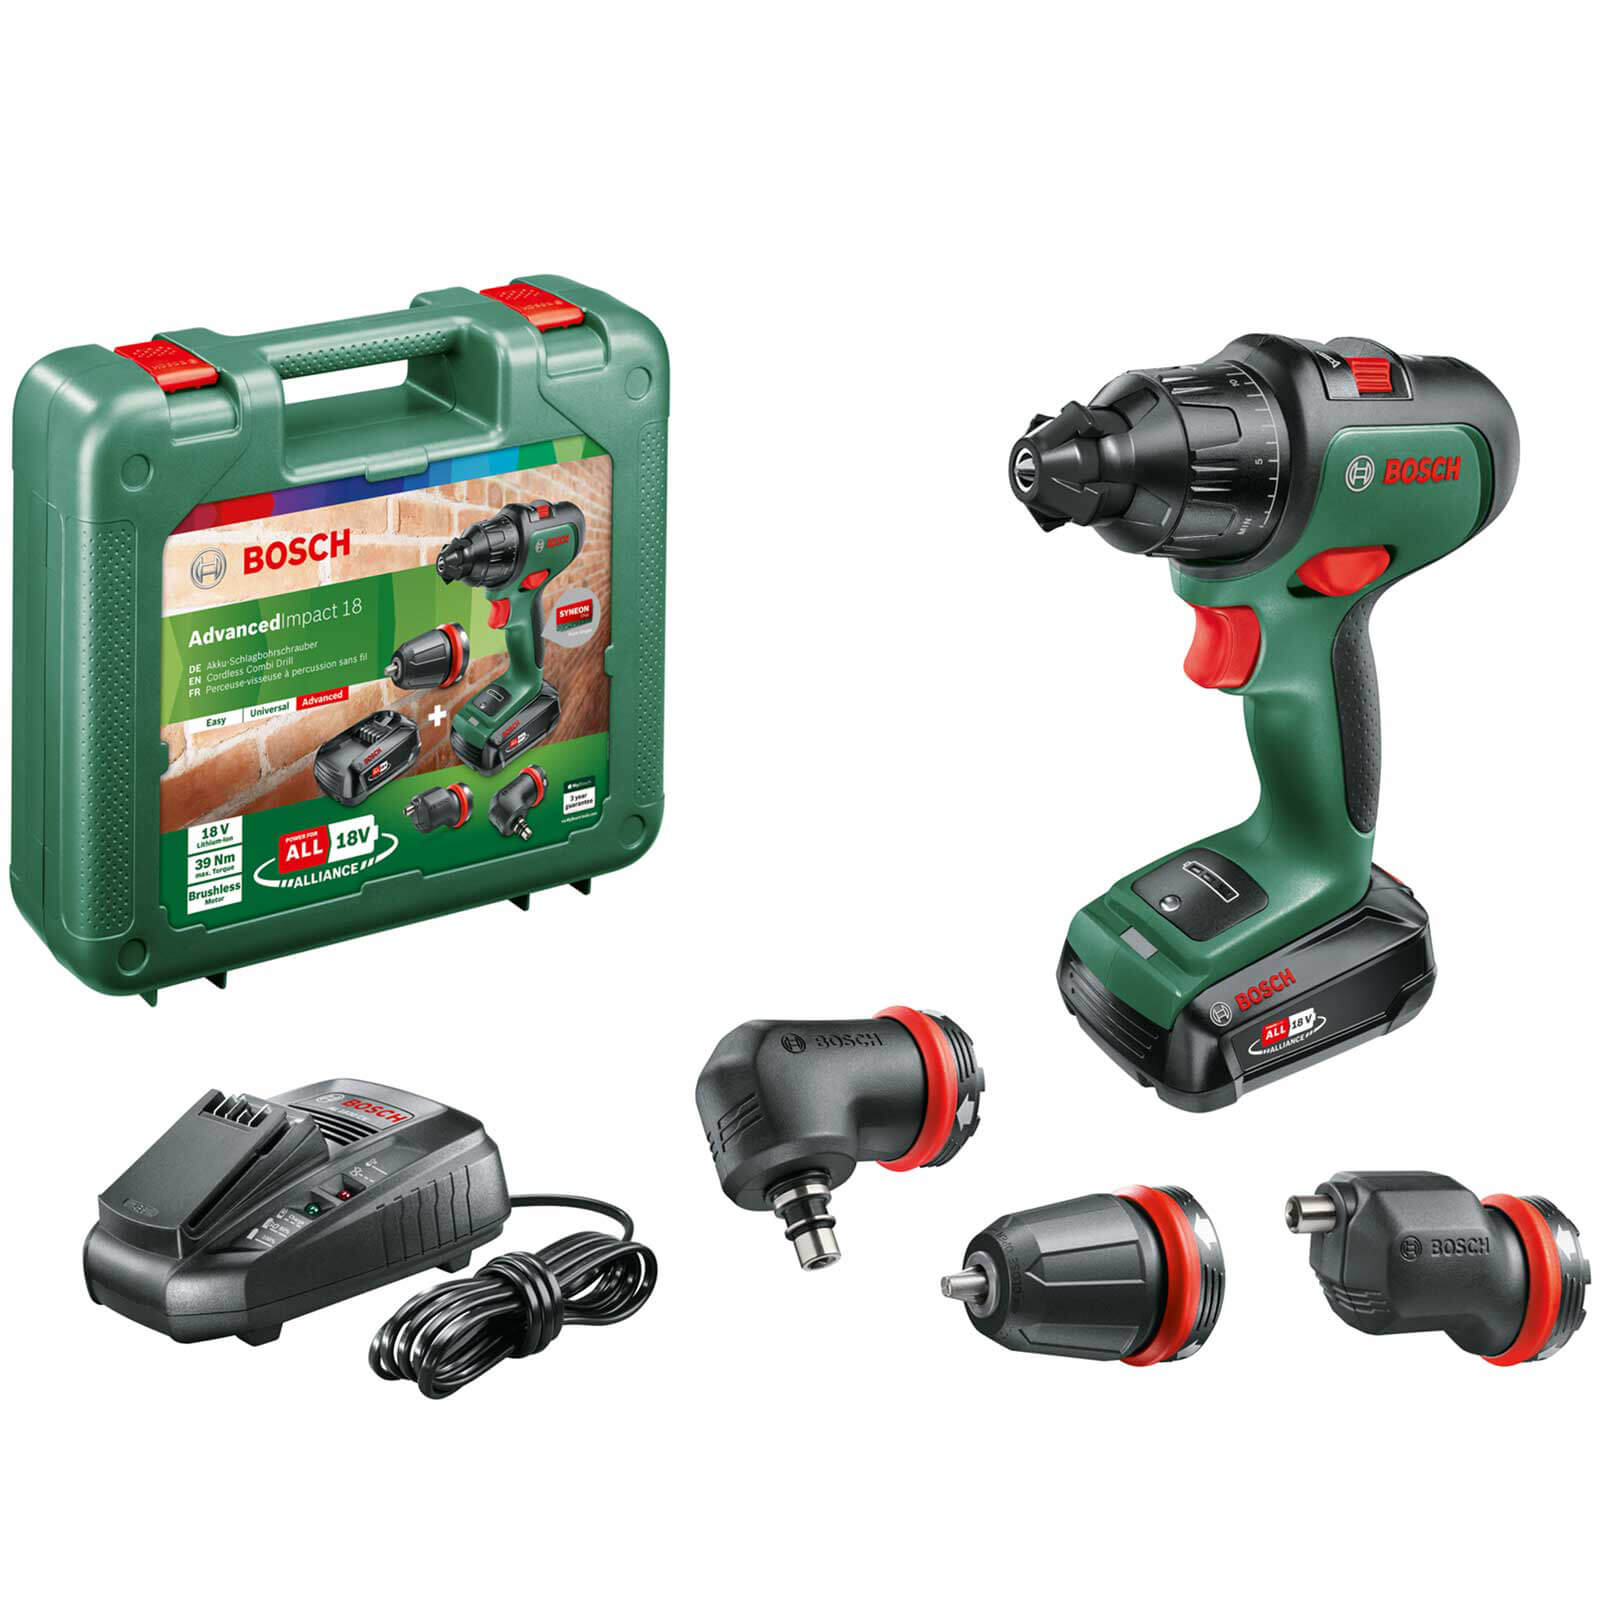 Image of Bosch ADVANCEDIMPACT 18v Cordless Combi Drill and Attachments 1 x 2.5ah Li-ion Charger Case